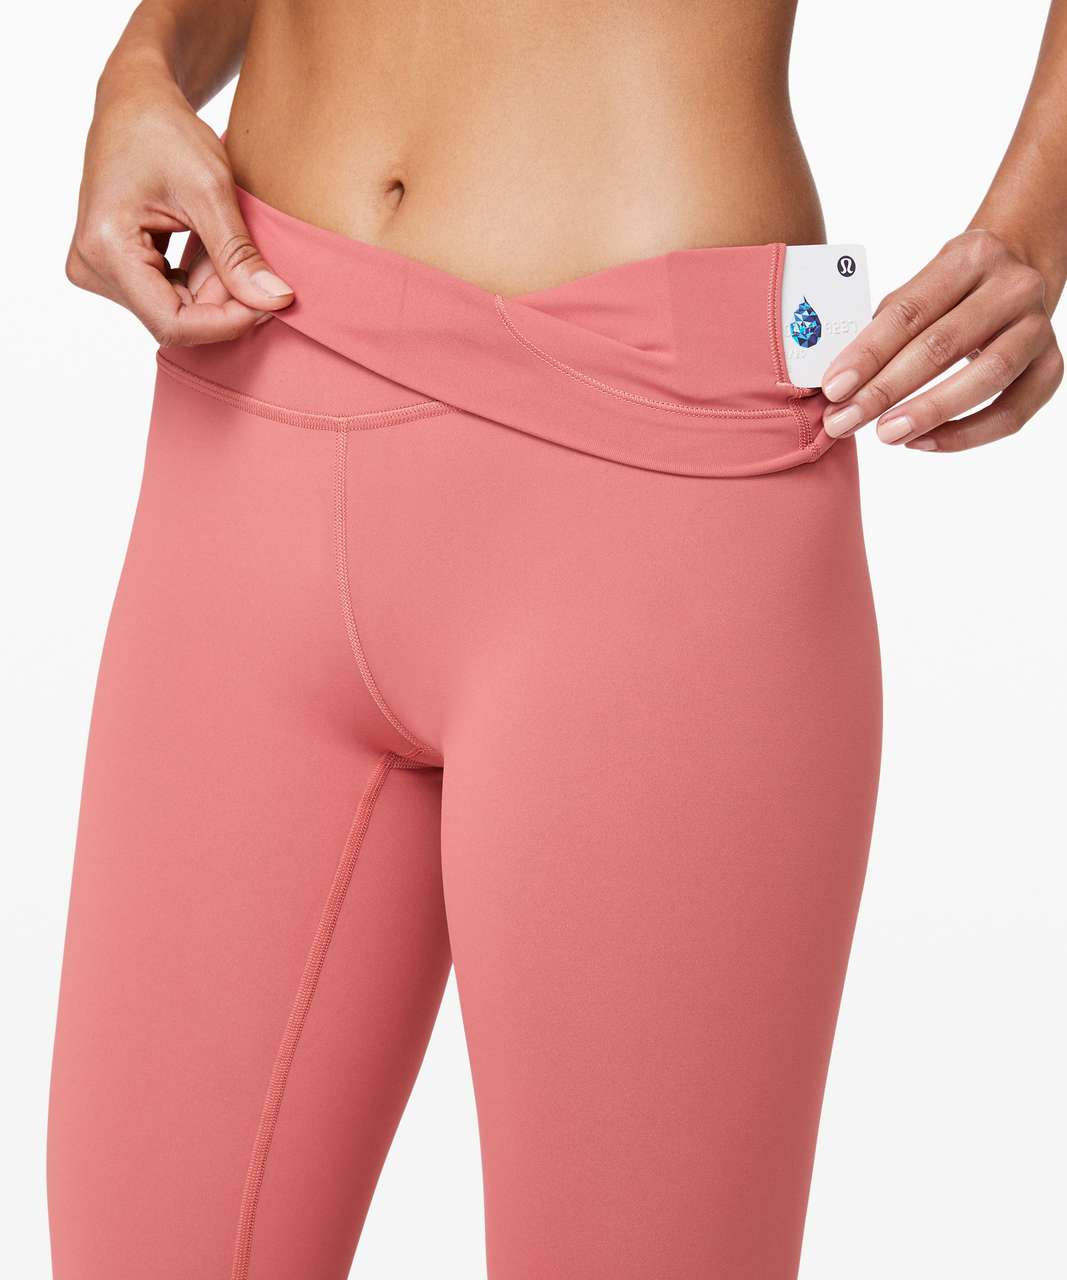 Lululemon Wunder Under High-Rise Tight 25" *Full-On Luxtreme - Rustic Coral (First Release)